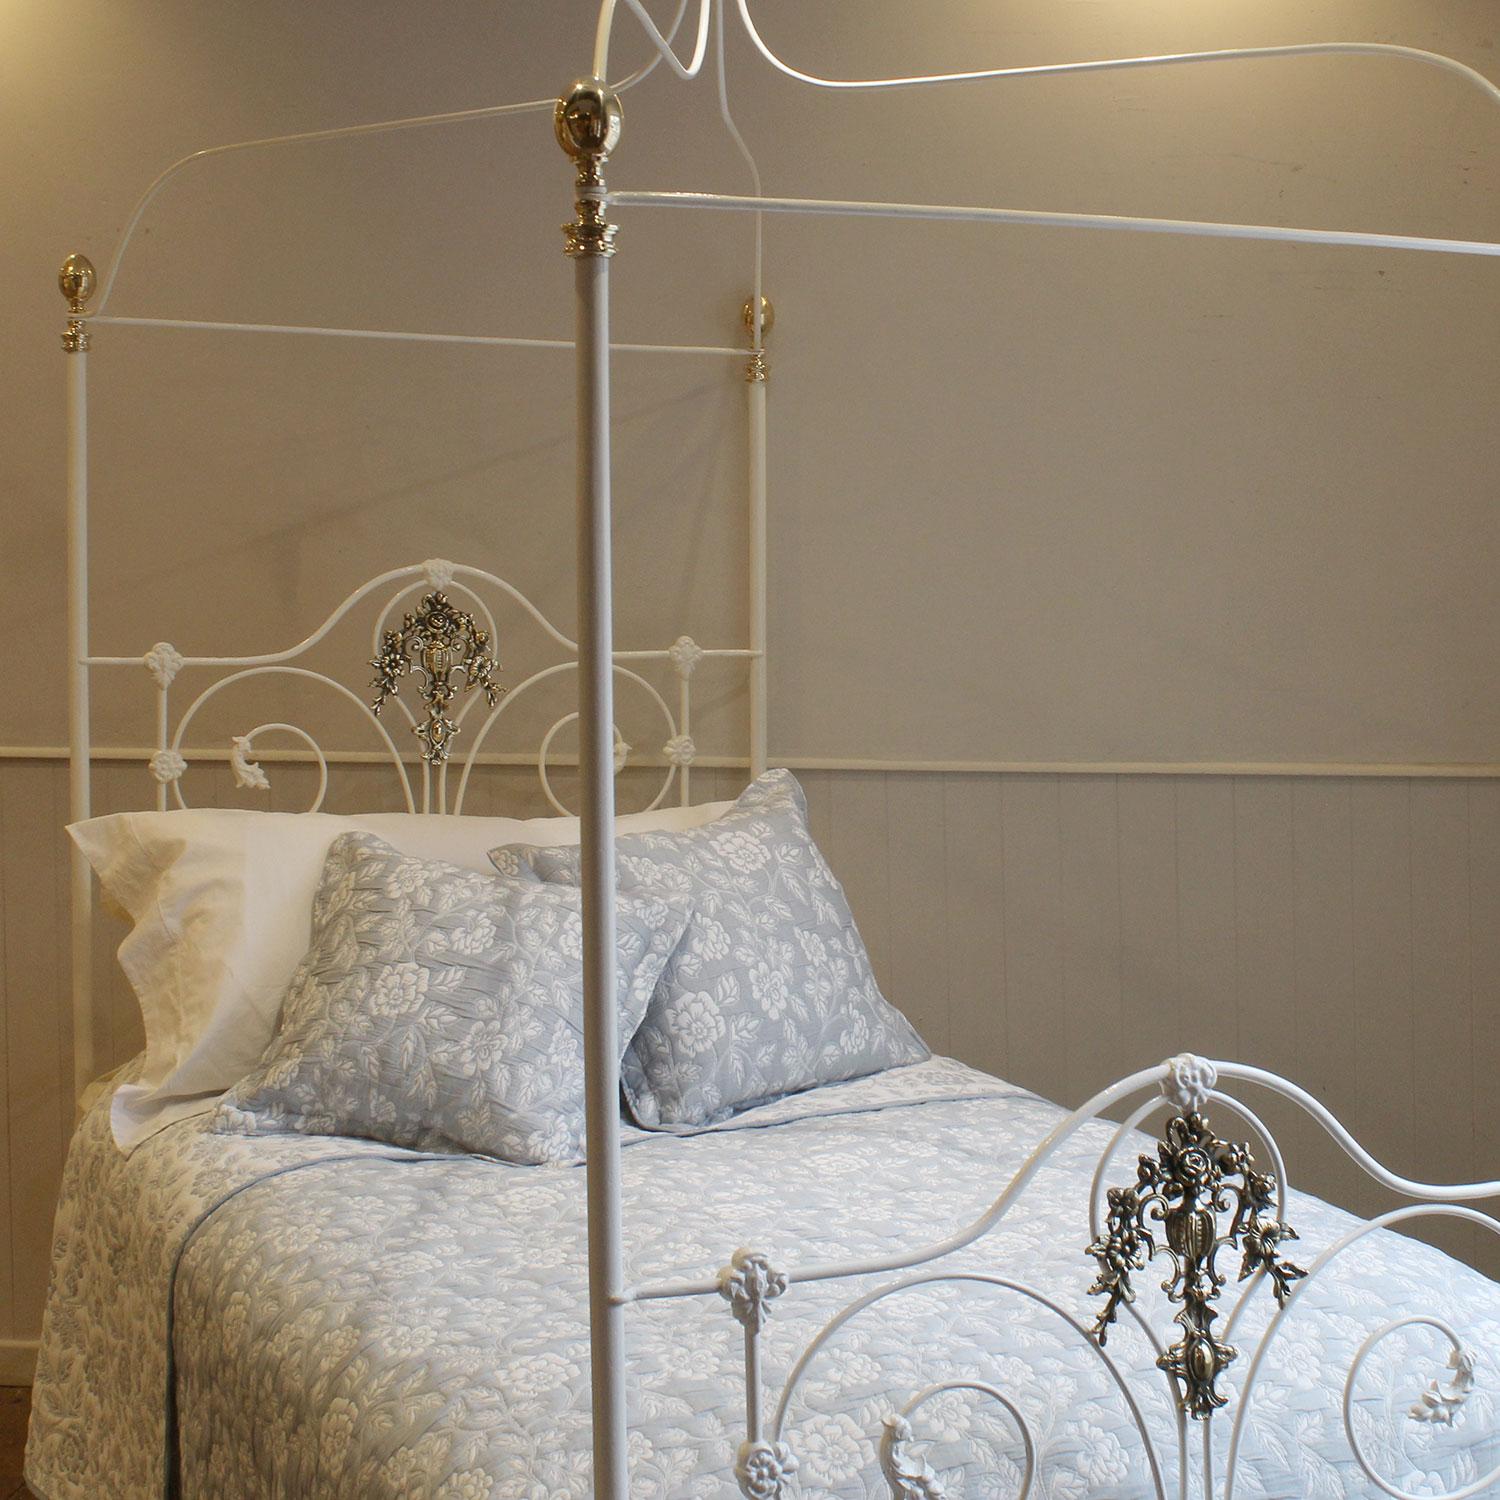 cast iron four poster bed